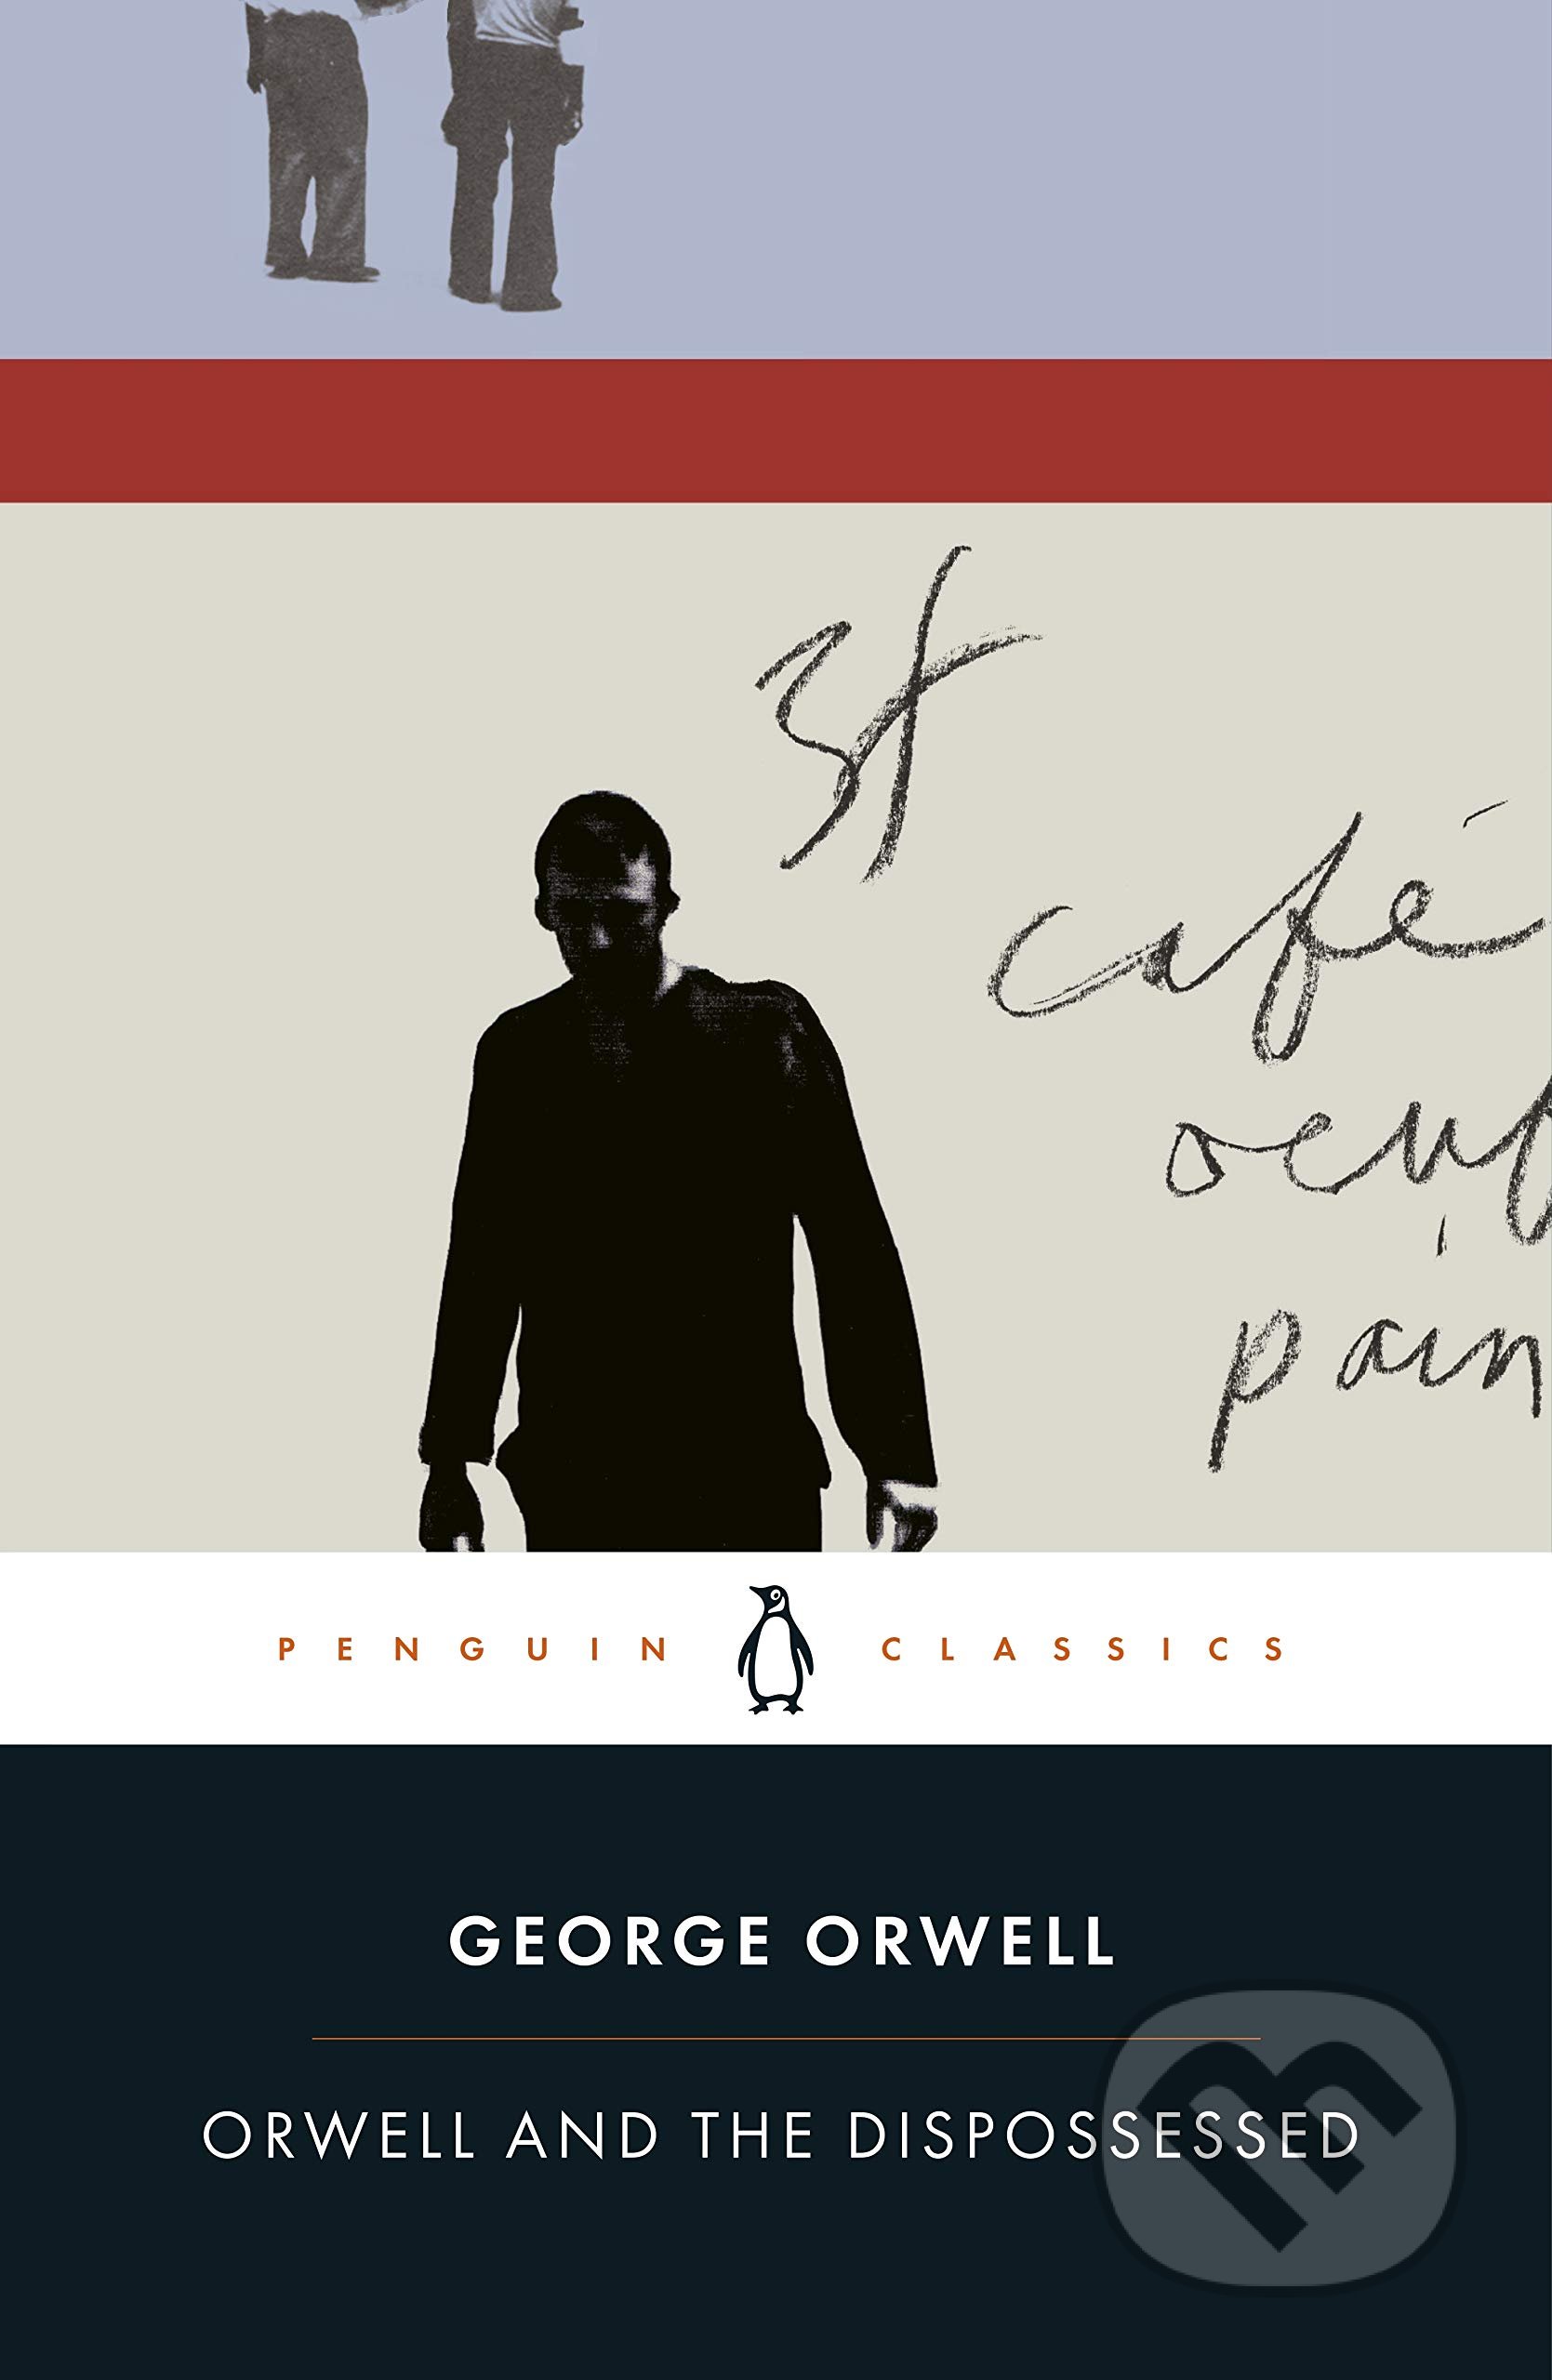 Orwell and the Dispossessed - George Orwell, Penguin Books, 2020